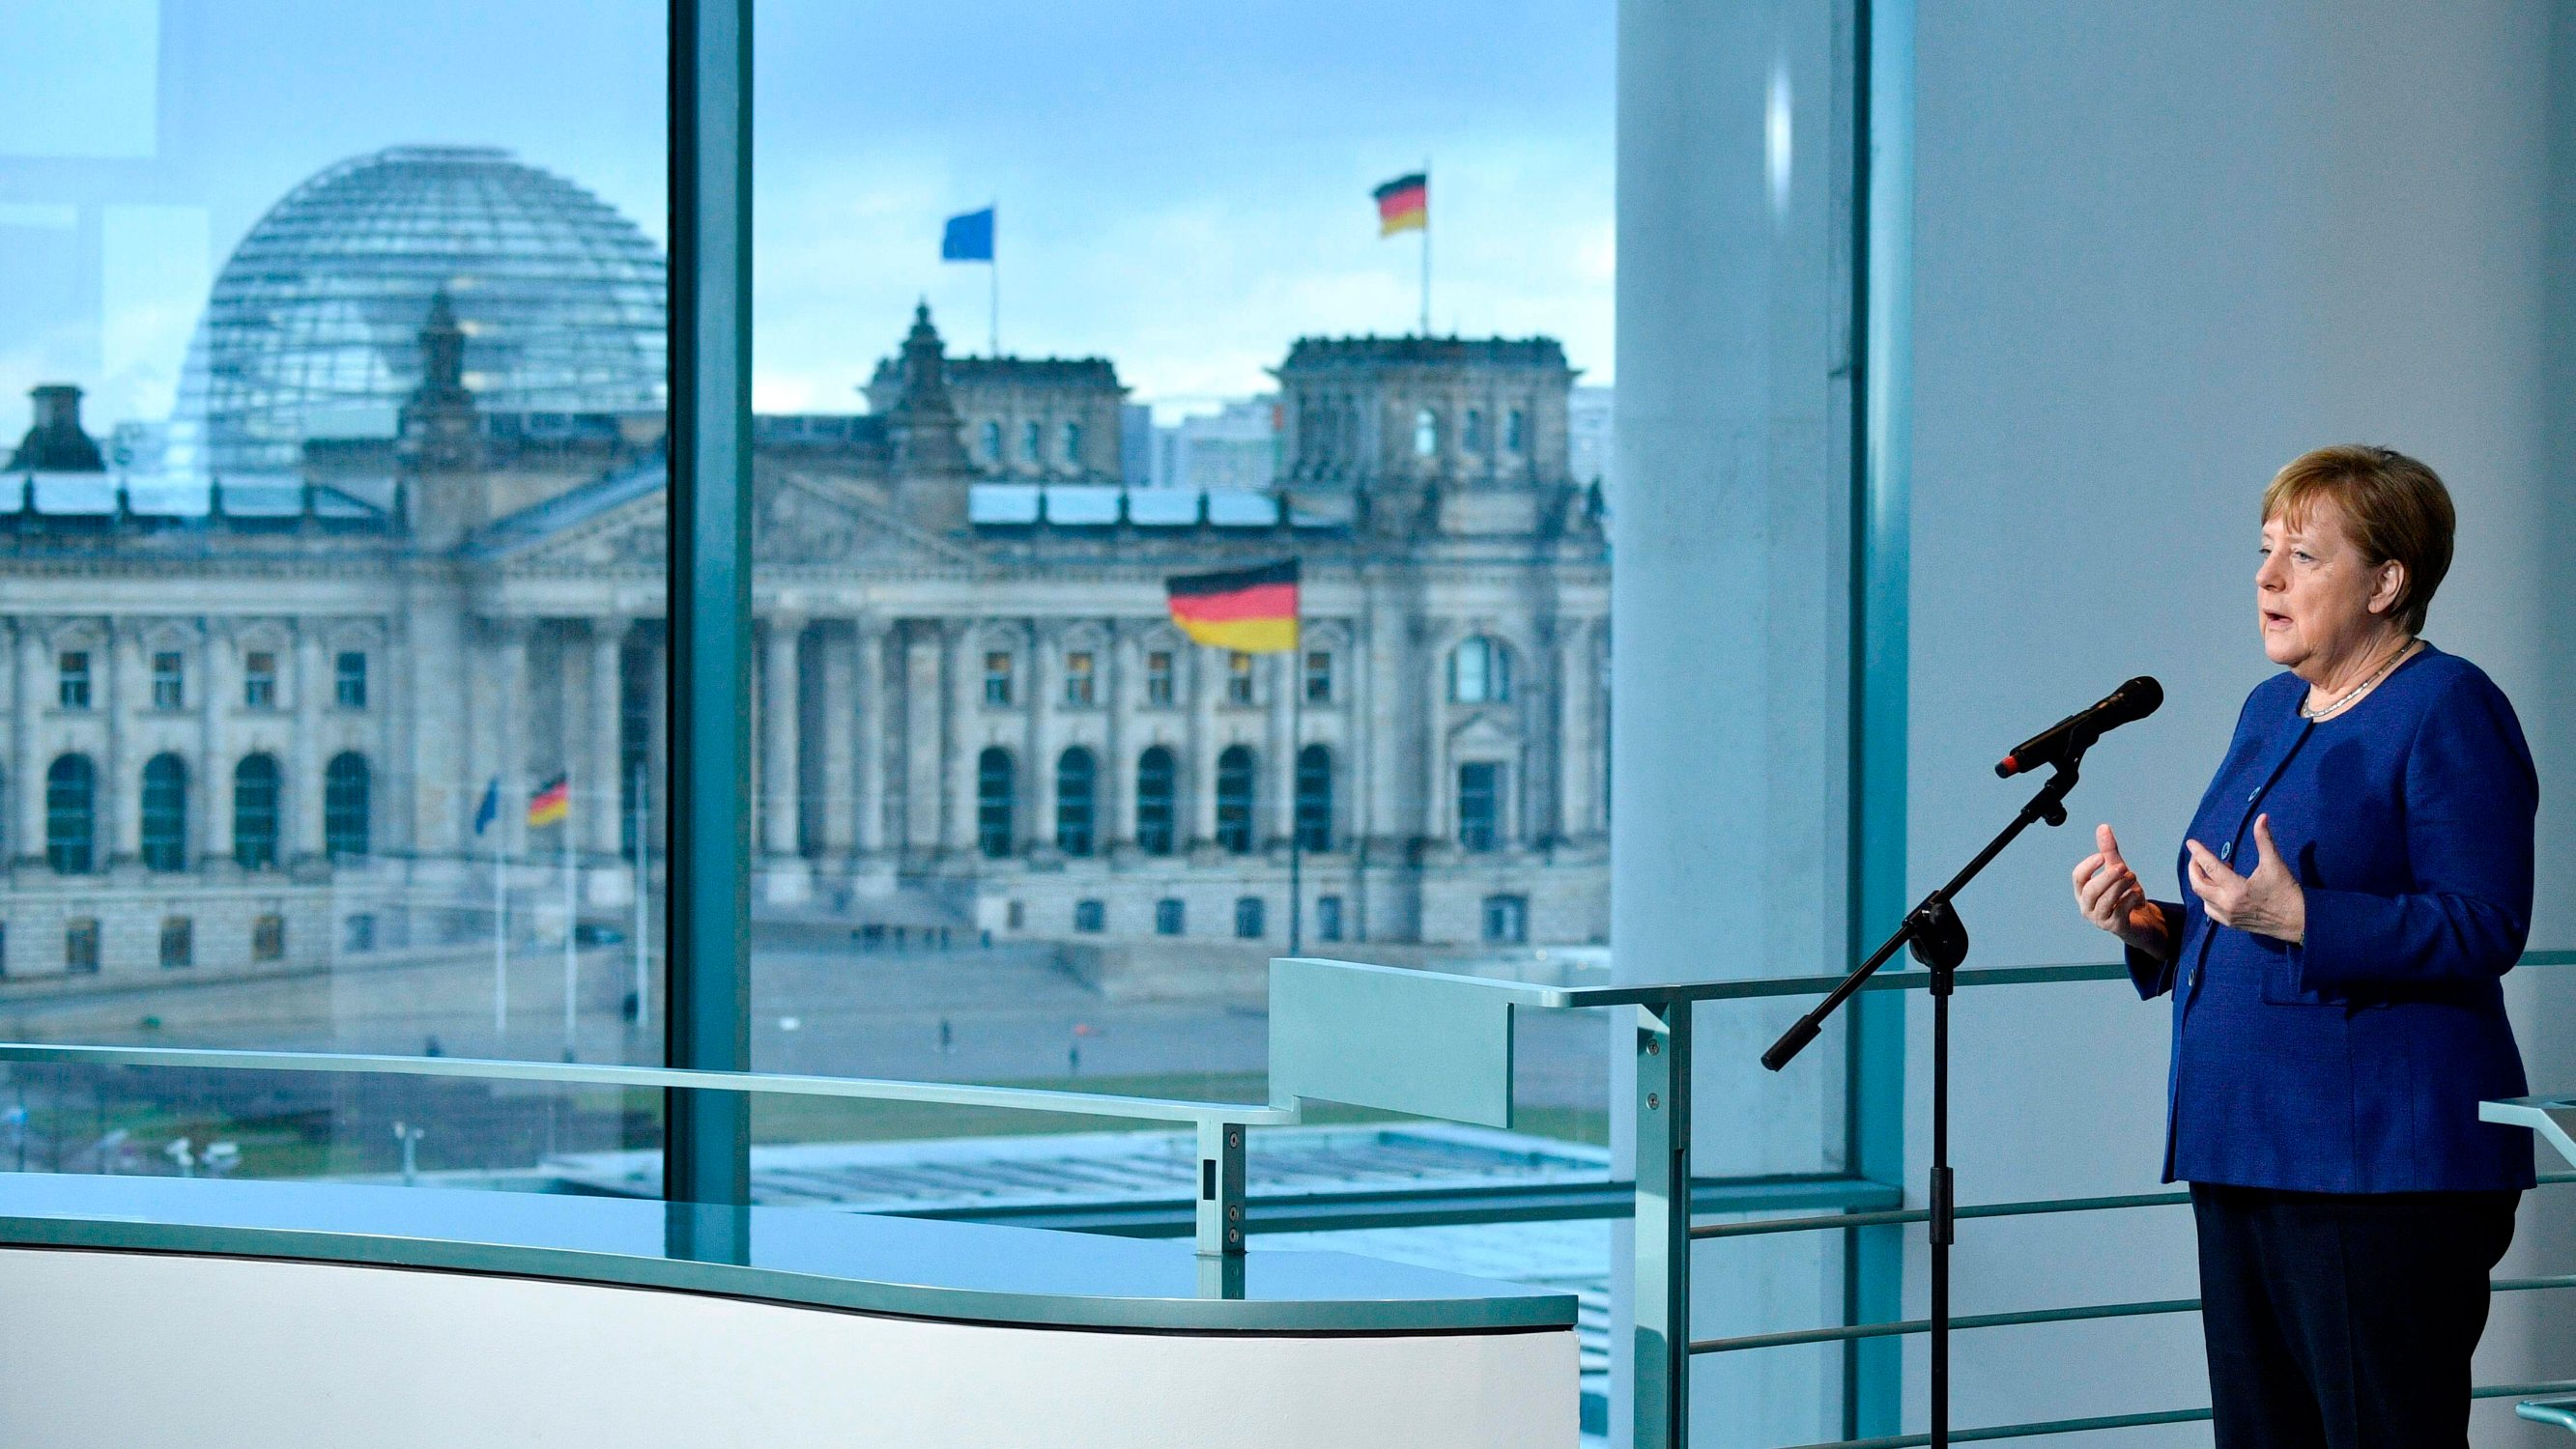 German Chancellor Angela Merkel makes a press statement before meeting with the heads of associations of the German economy and the trade unions  on the economic consequences of the spread of the coronavirus COVID-19 at the Chancellery, with a view of the Reichstag, the bukiding housing the lower house of parliament, through the window in Berlin on March 13, 2020. (Photo by John MACDOUGALL / POOL / AFP)